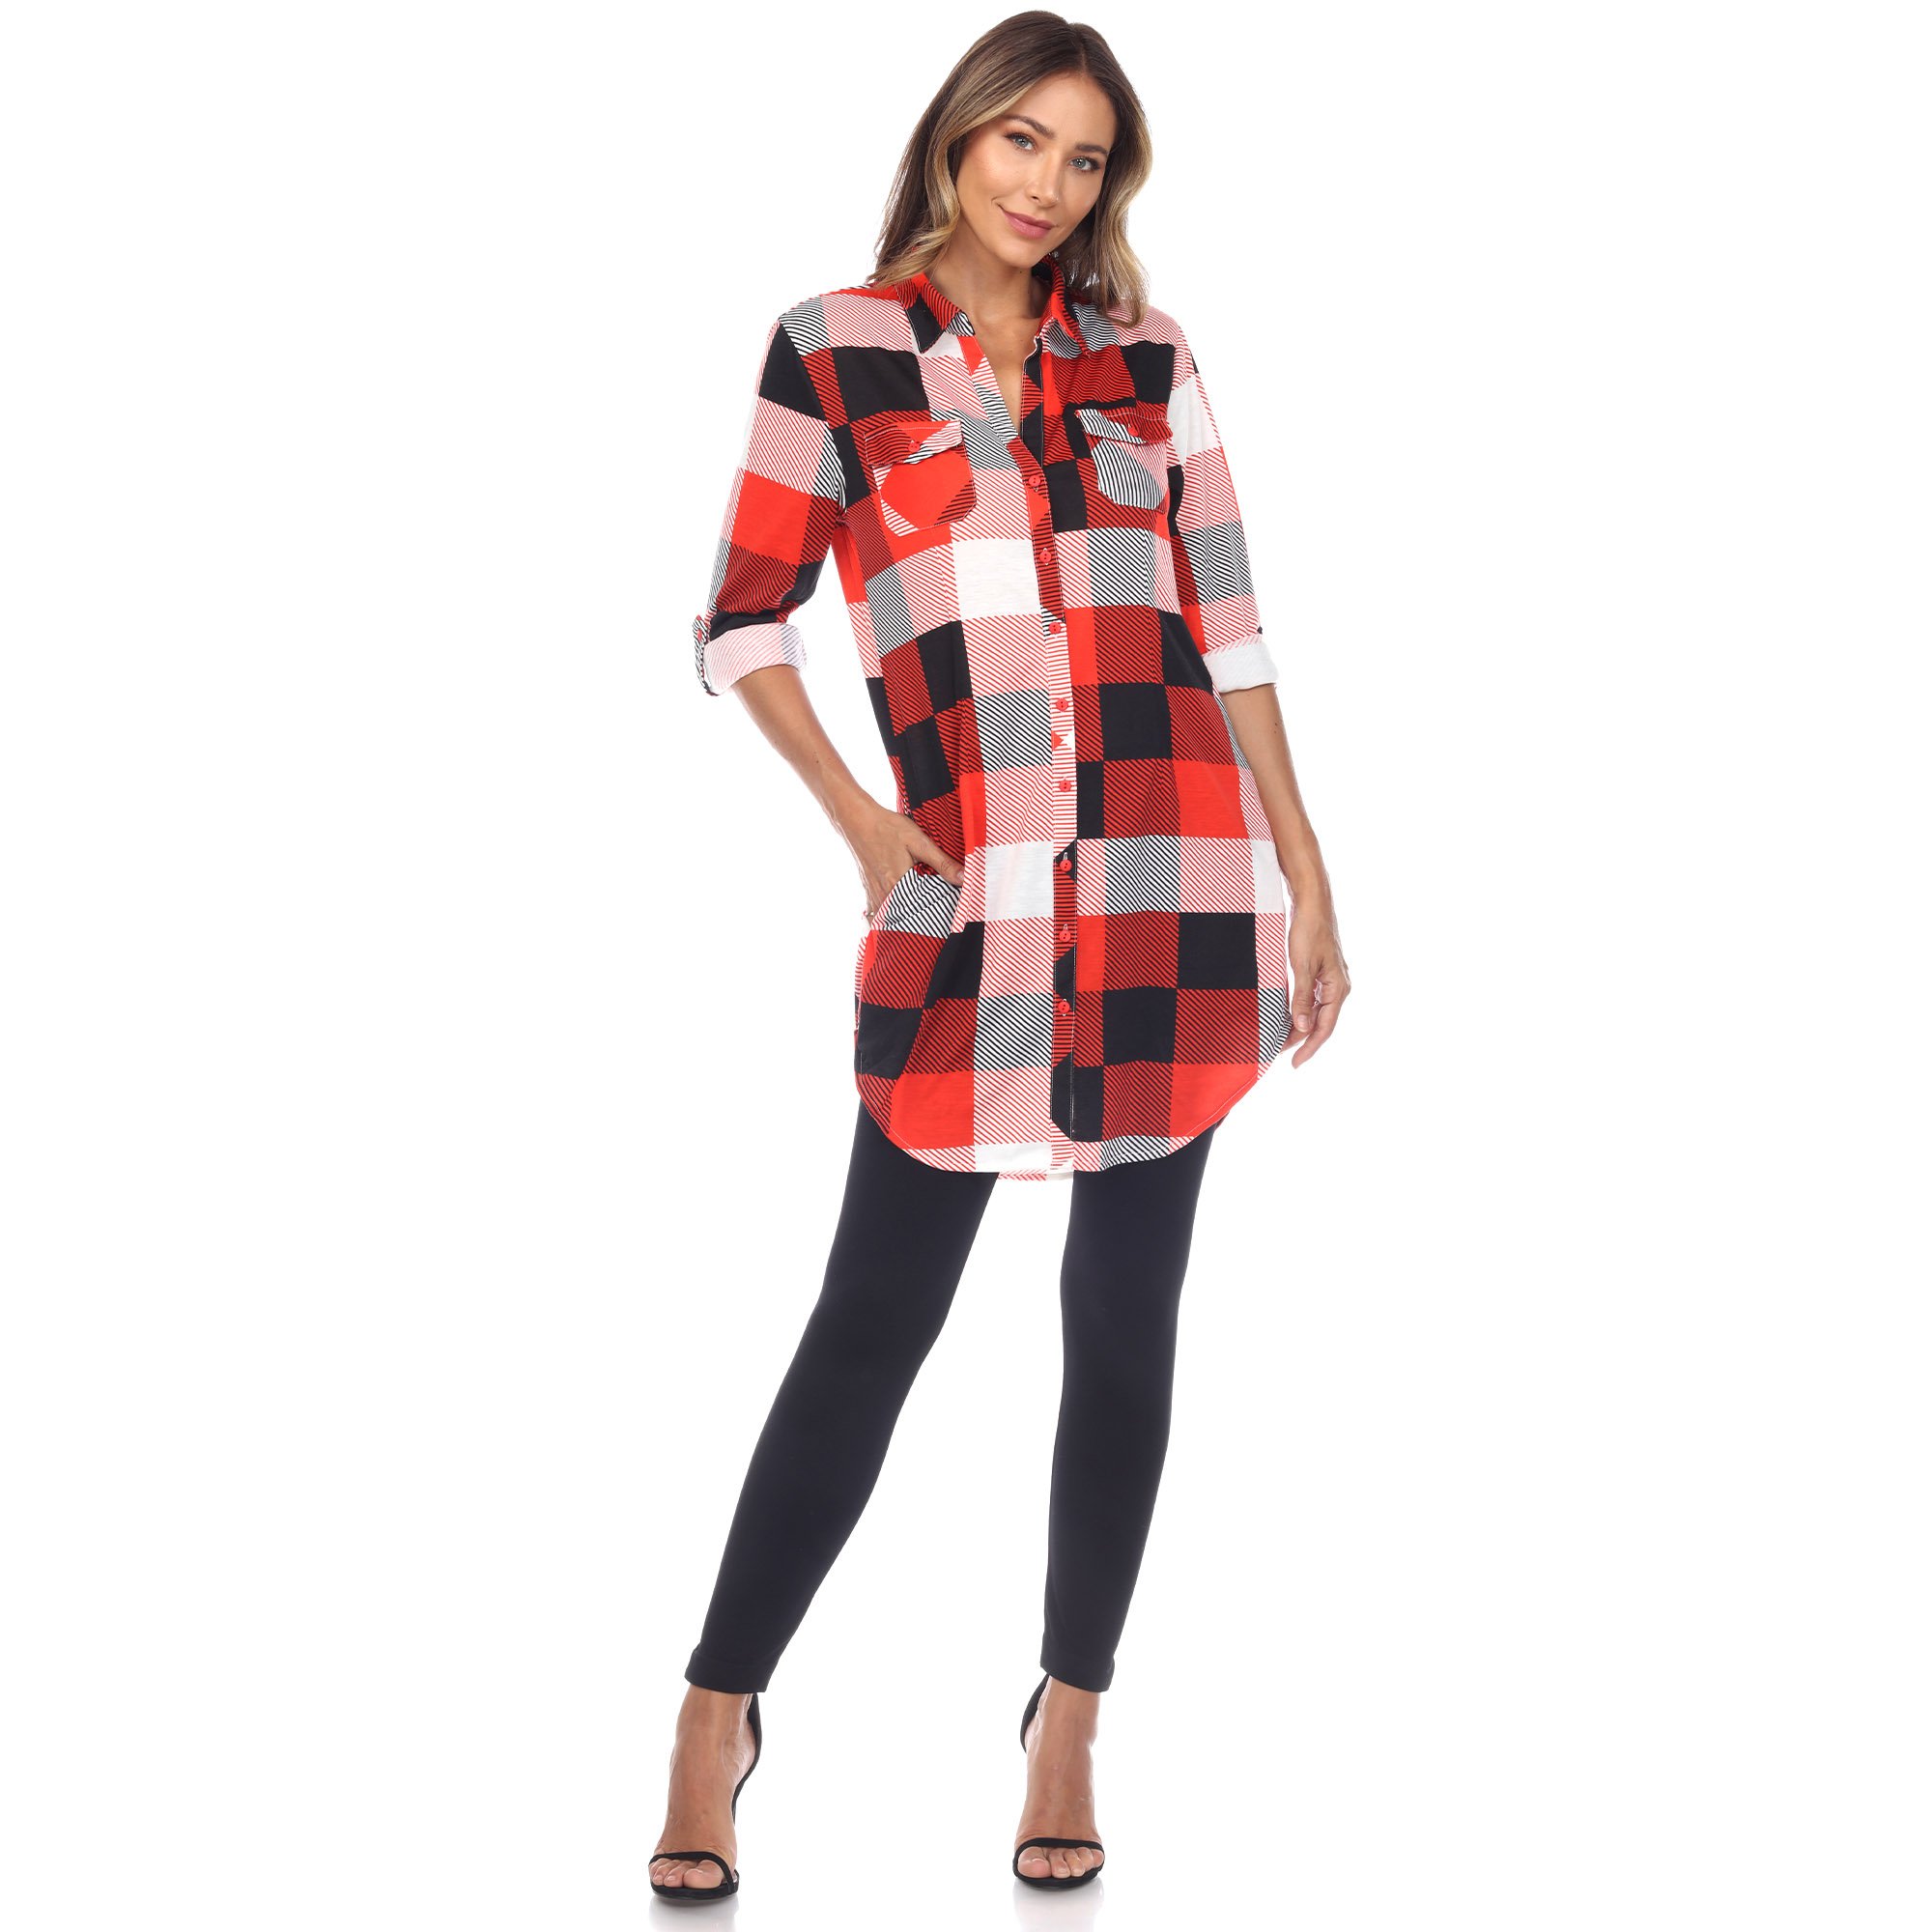 White Mark Women's Stretchy Buffalo Plaid Tunic Top - Blue/Brown, Small